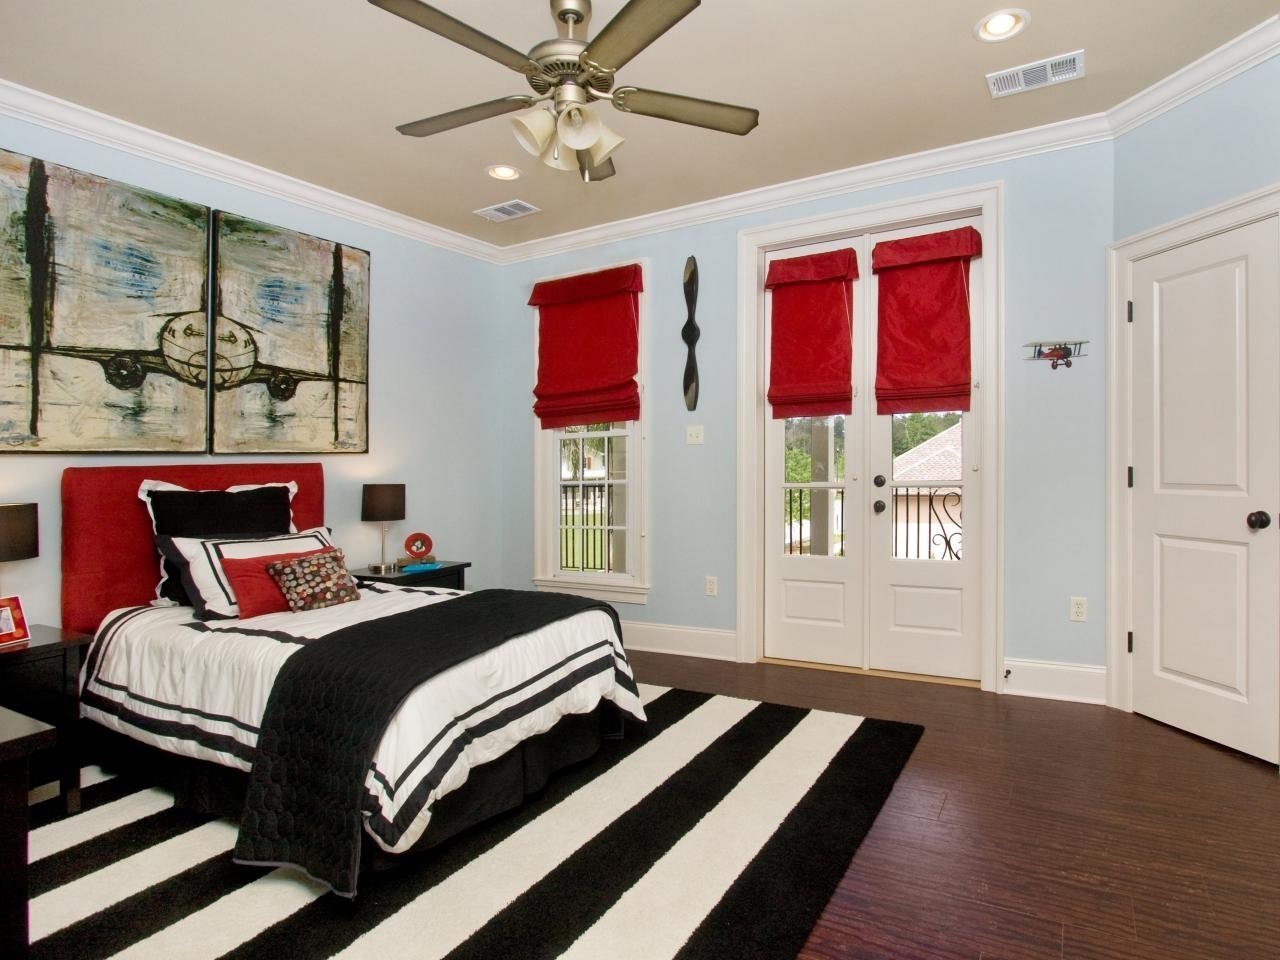 10 Lovely Black White And Red Bedroom Ideas bedroom decorating ideas black and white red 2022